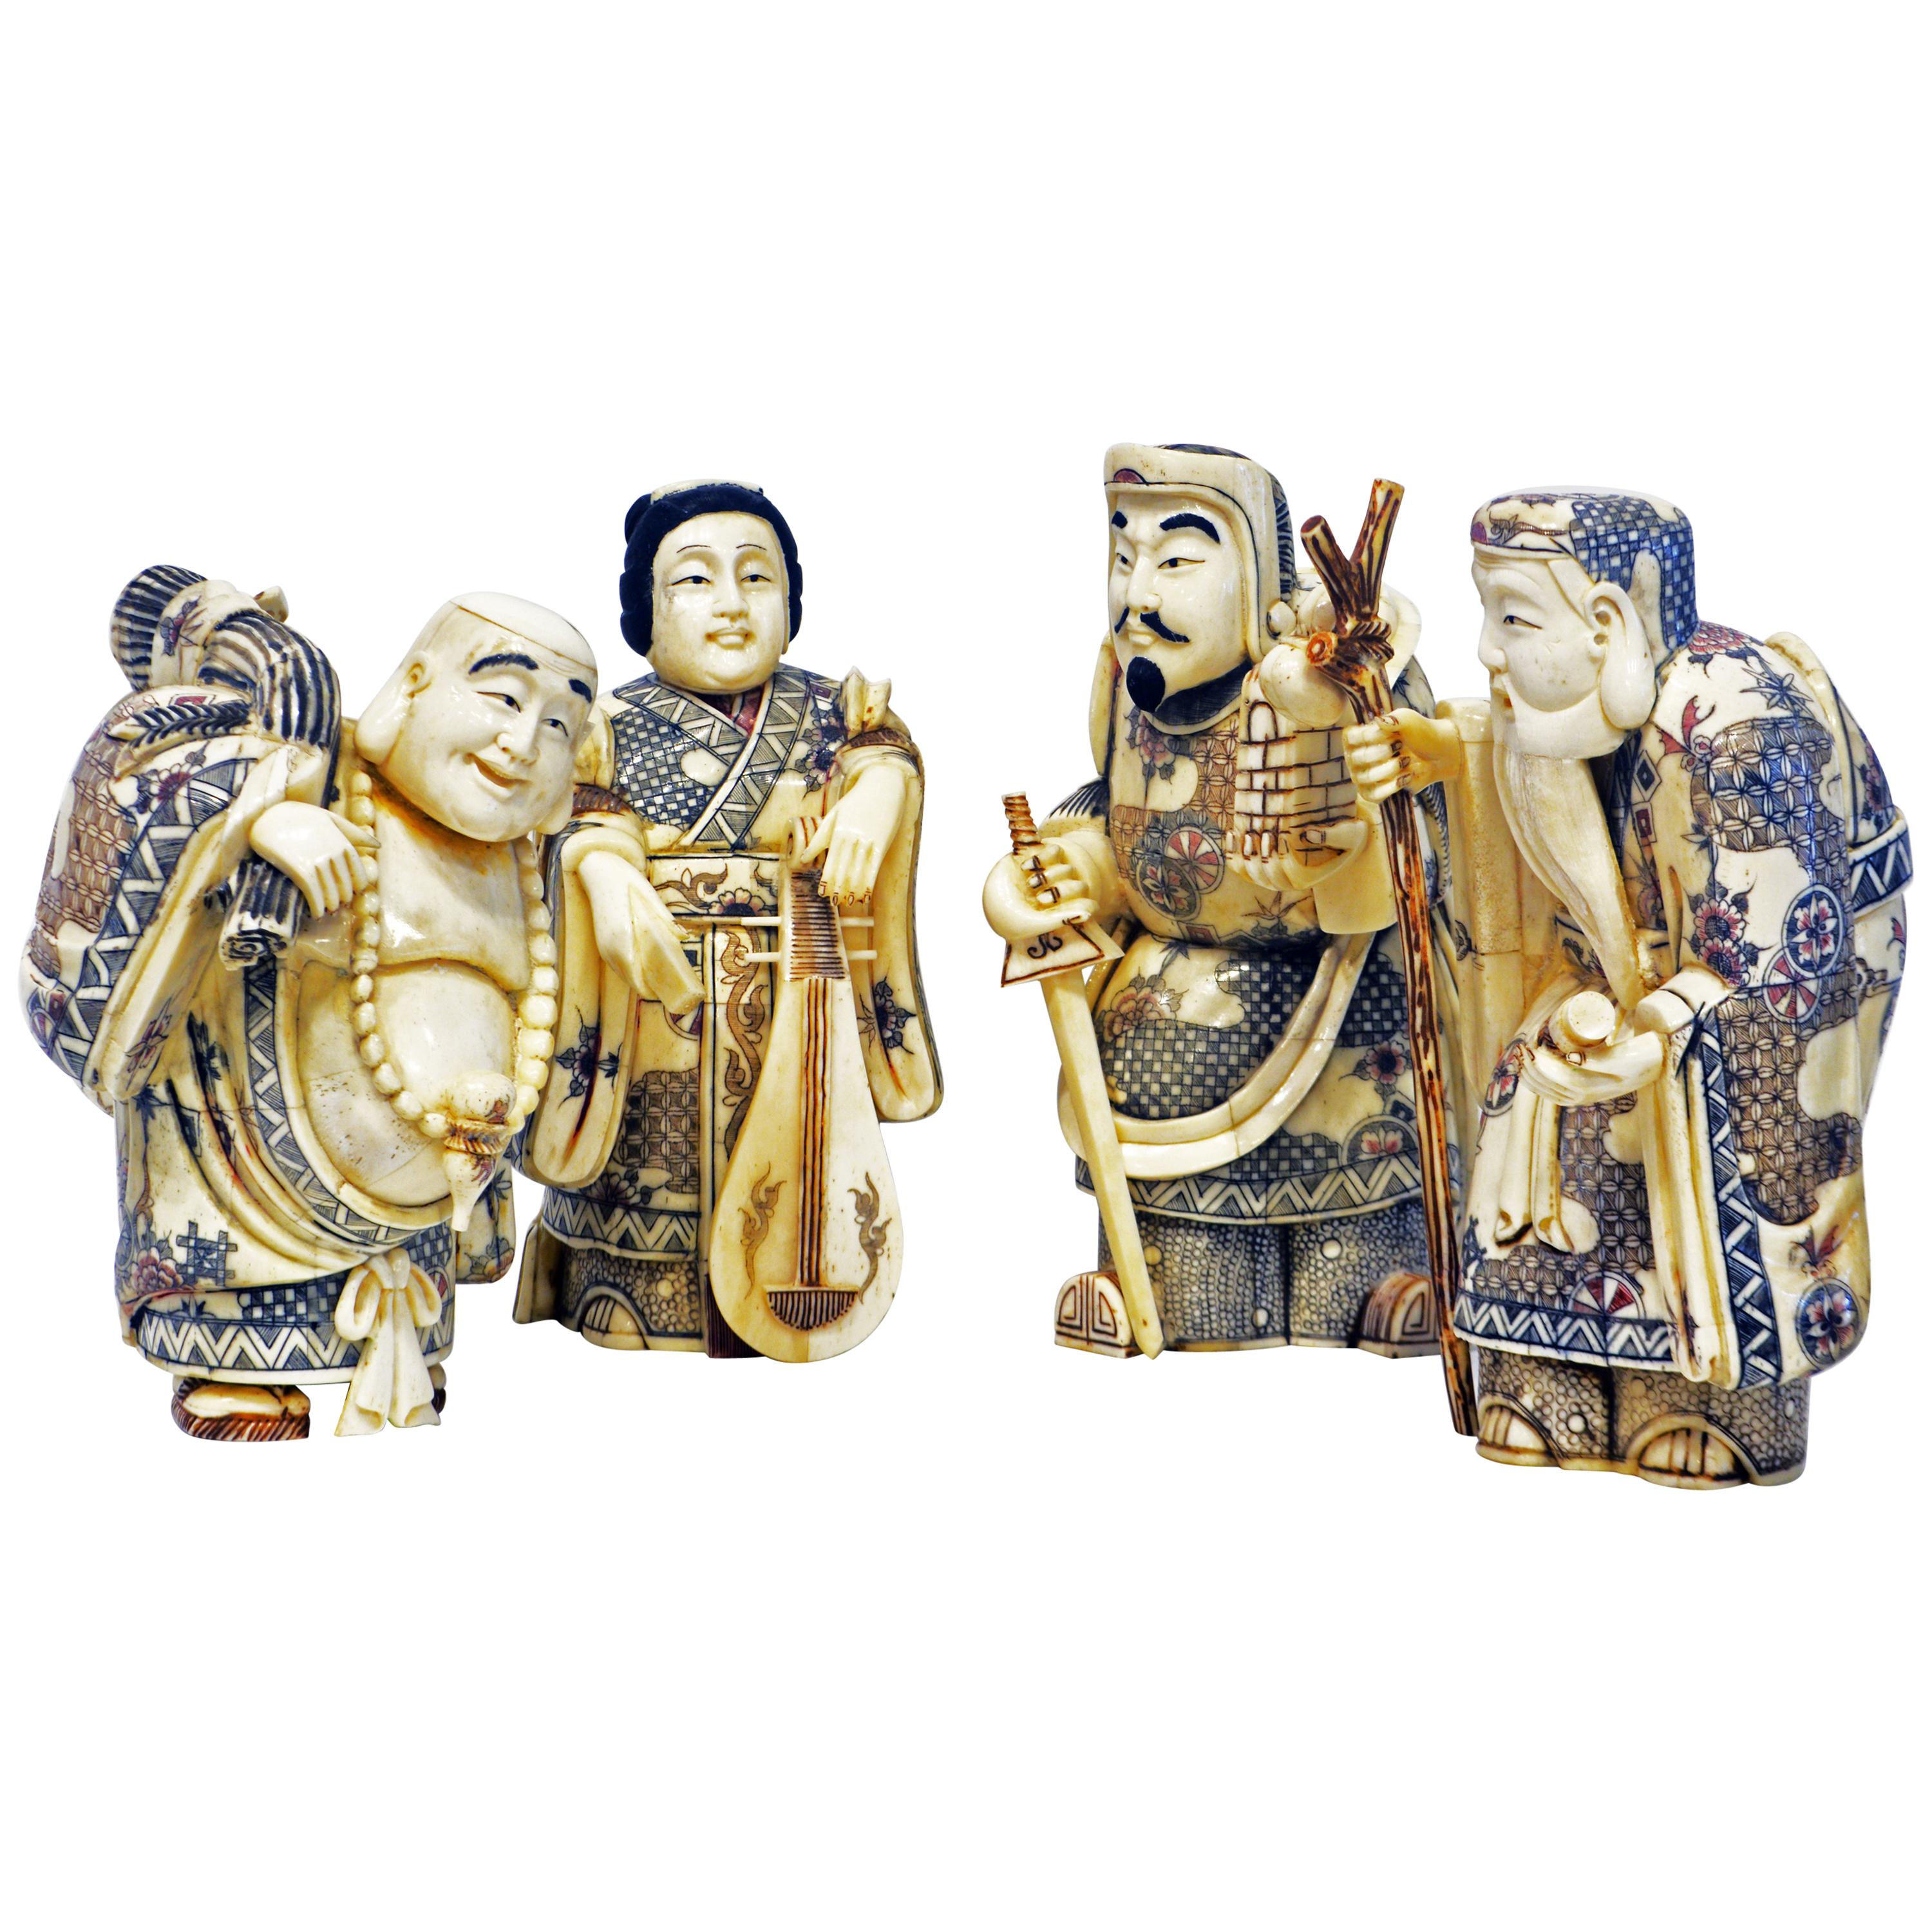 Group of Four Chinese Carved Ox-Bone Scrimshaw Immortal Figures, 20th Century